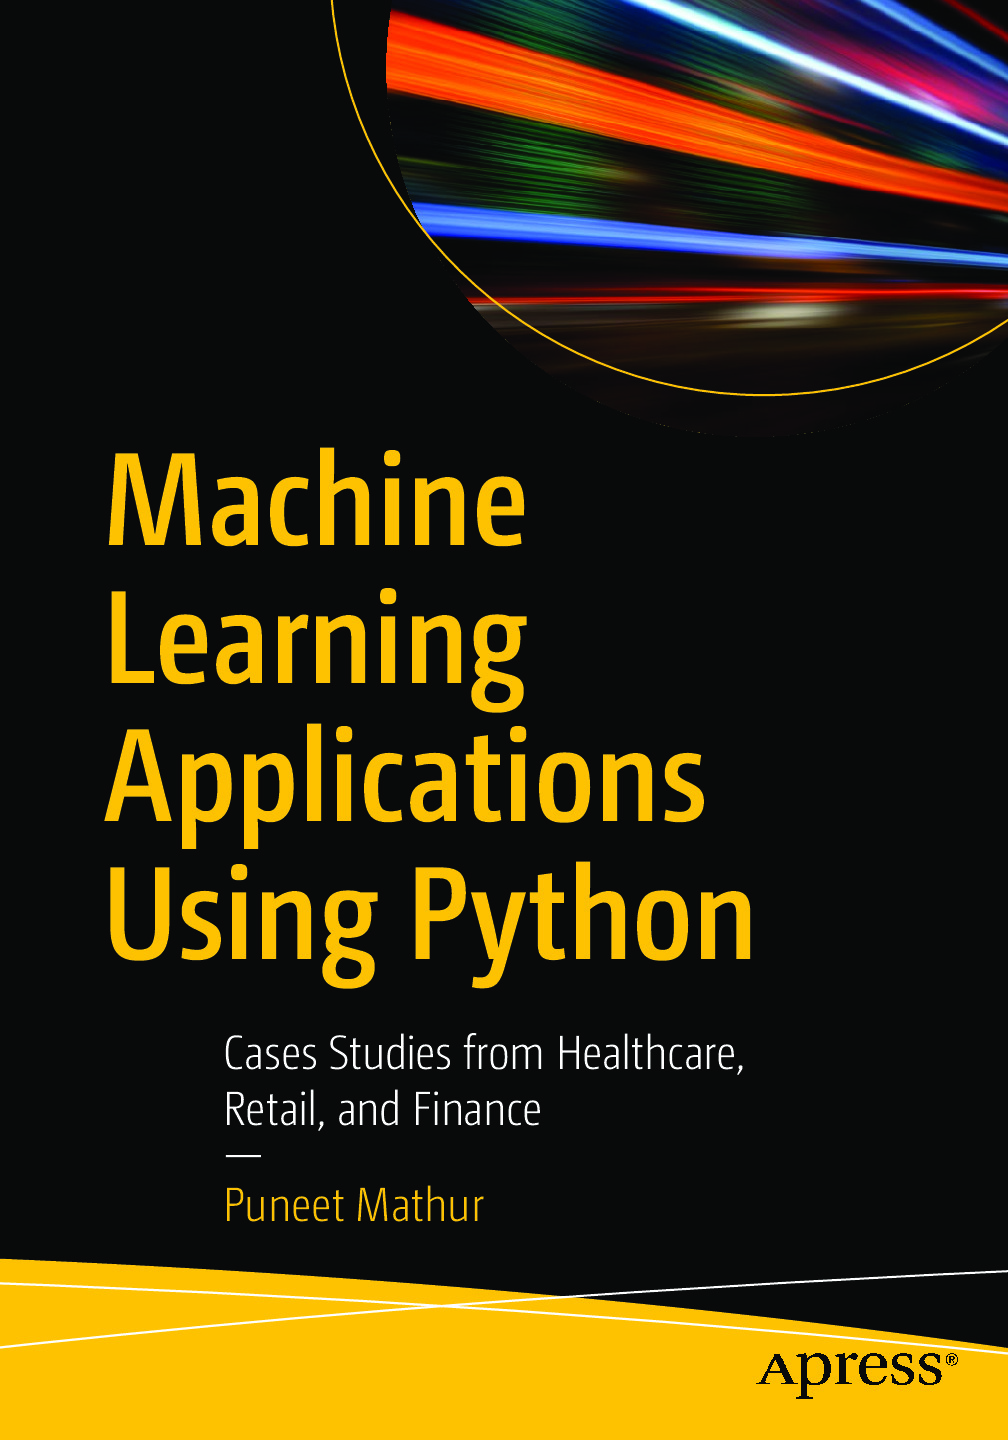 Machine Learning Applications Using Python – Cases Studies from Healthcare, Retail, and Finance by Puneet Mathur (z-lib.org)